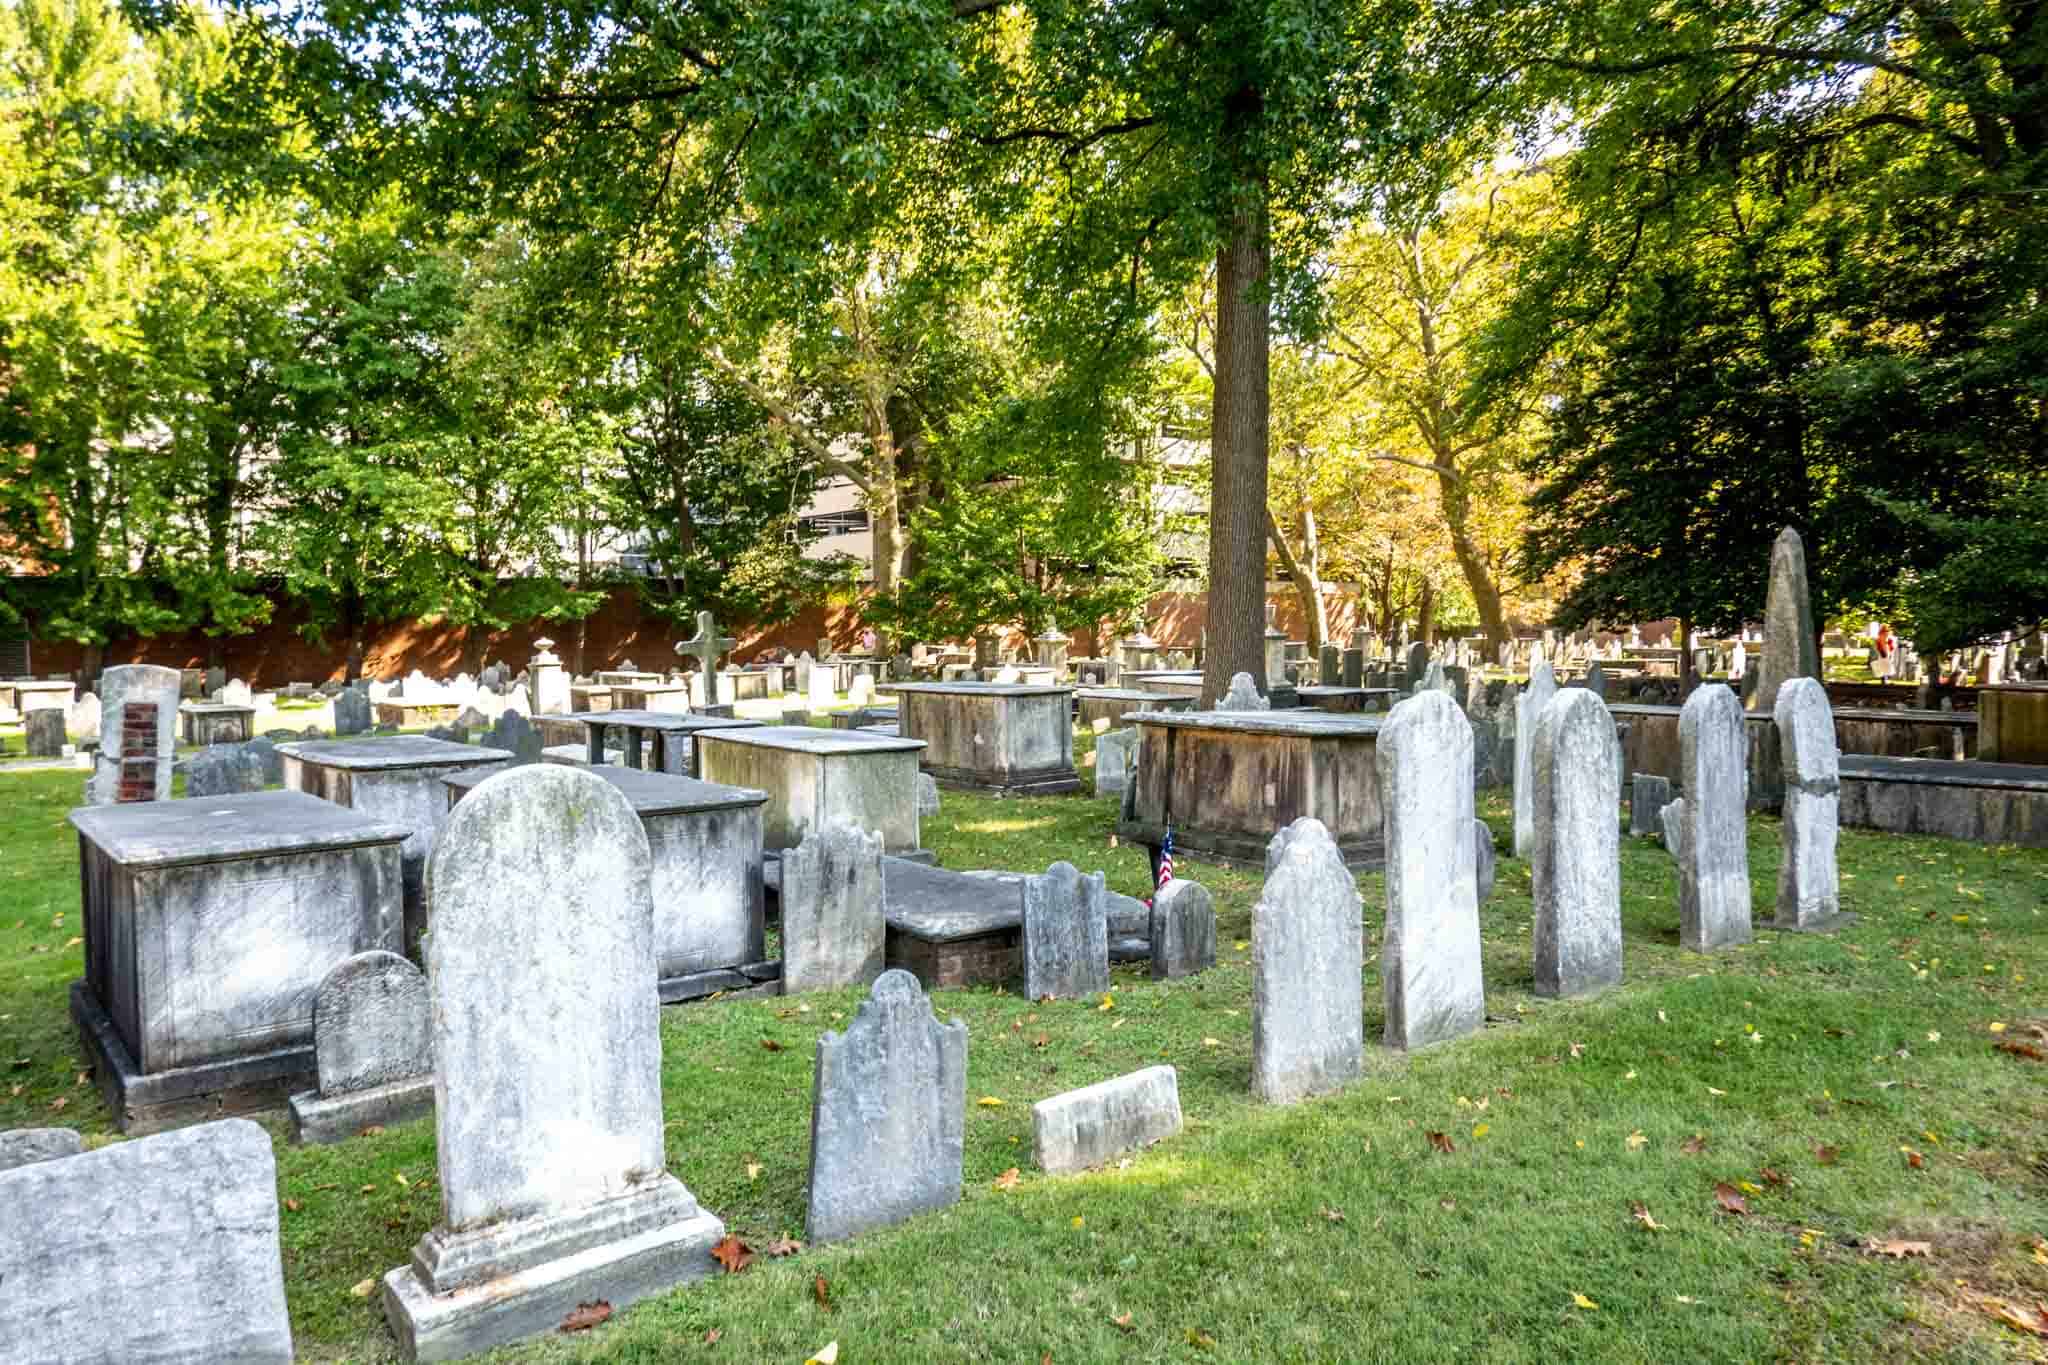 Rows of old tombstones in Christ Church burial ground surrounded by trees